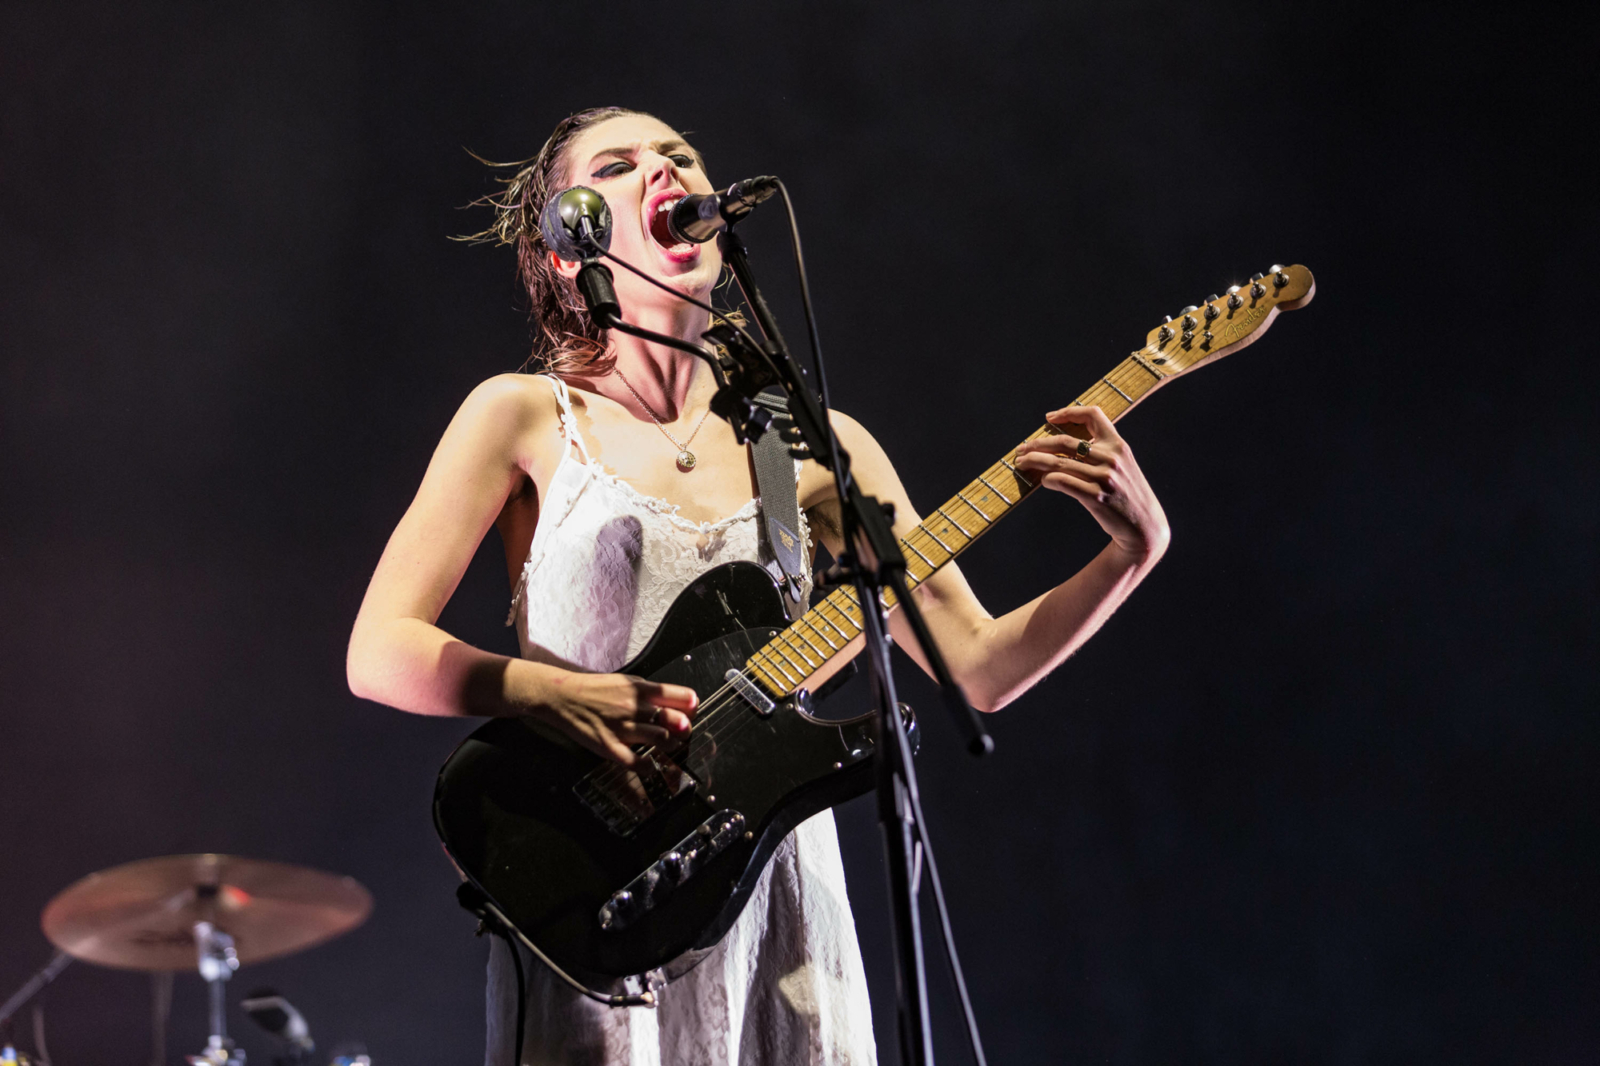 Wolf Alice, Jorja Smith and more to play Rock Werchter 2018